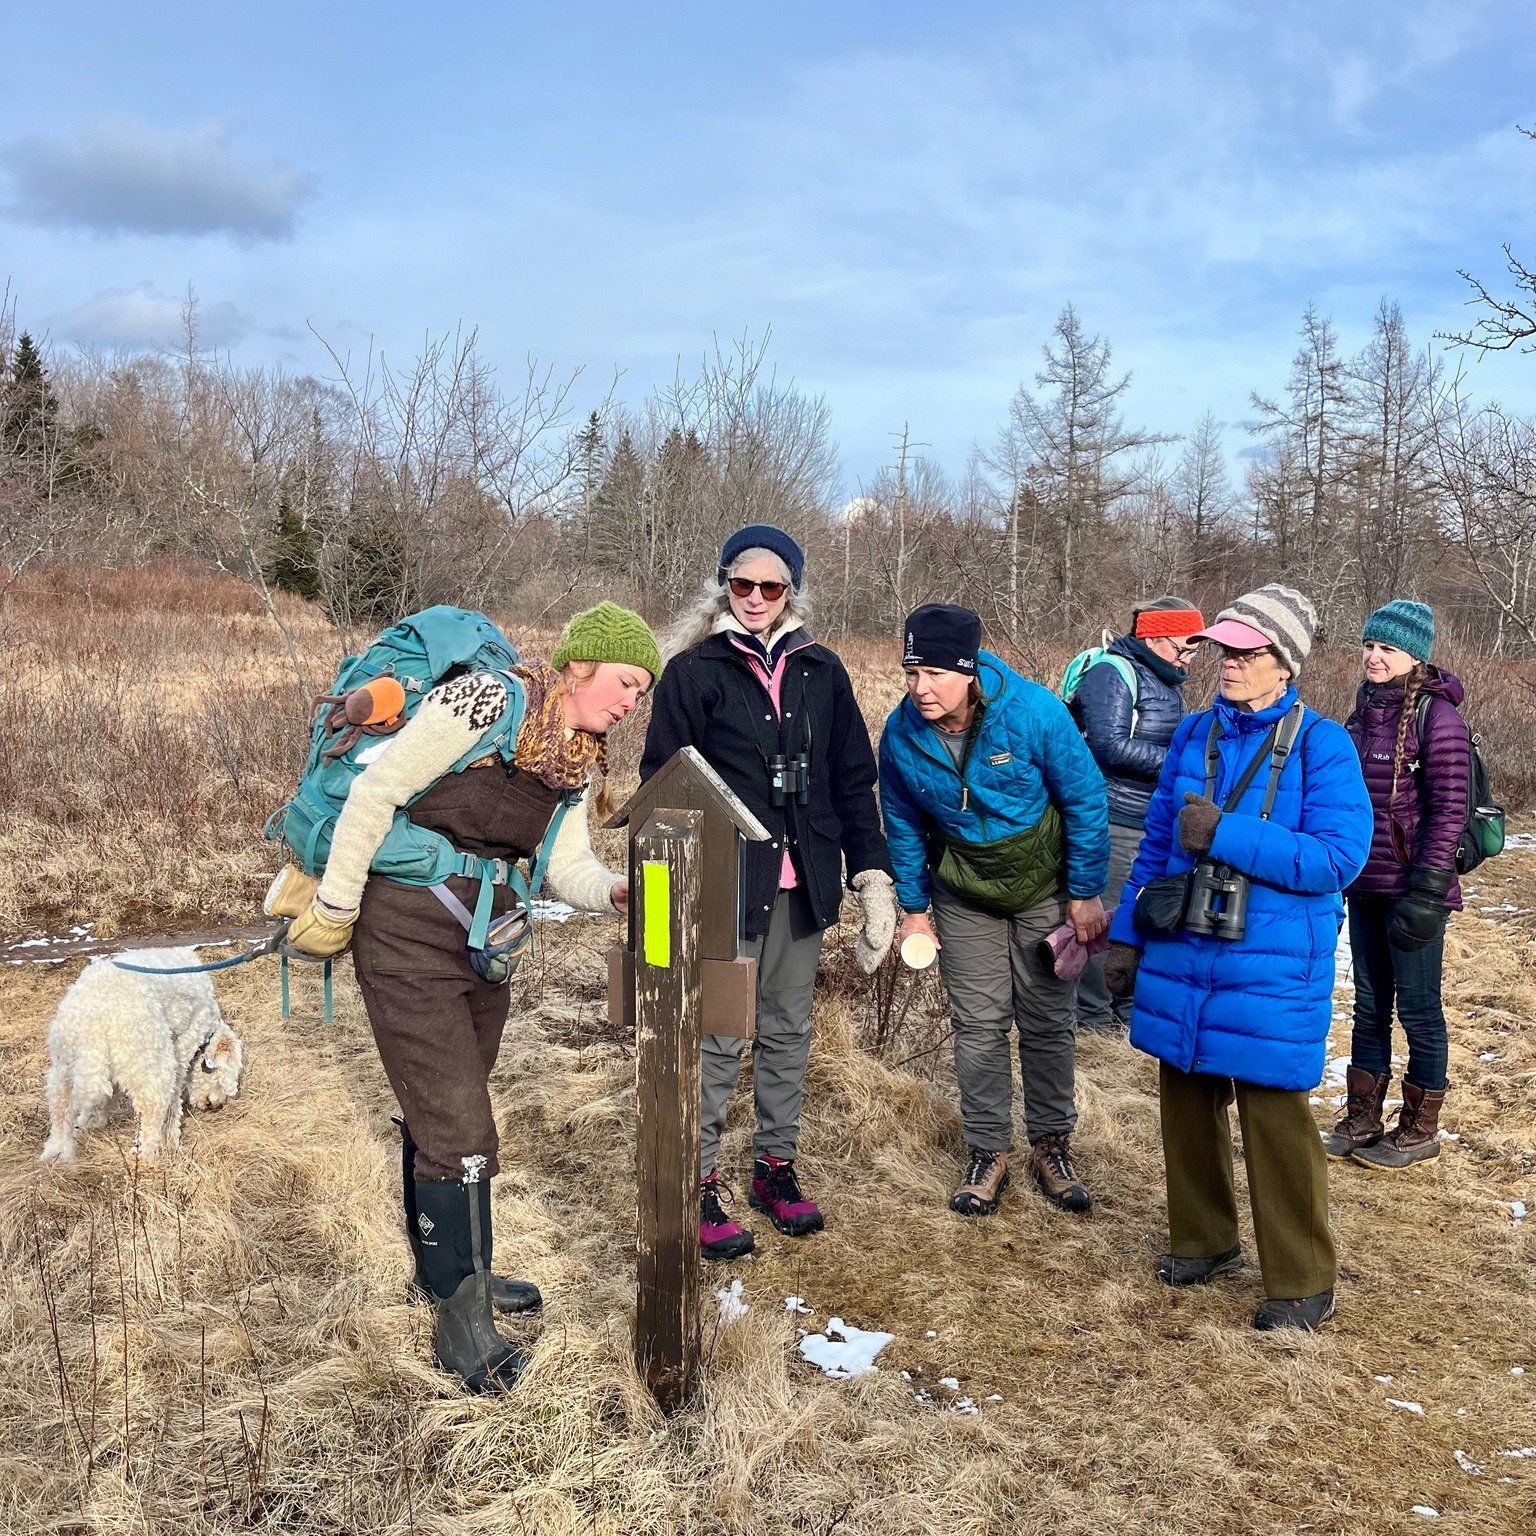 Did you know there are two amazing upcoming OWL events this month?

Our OWL Outing Club will be hiking the Cutler Bold Coast Trail this Sunday (rescheduled from Saturday due to weather forecast) and next weekend (4/27-4/28) we have our two day Orient